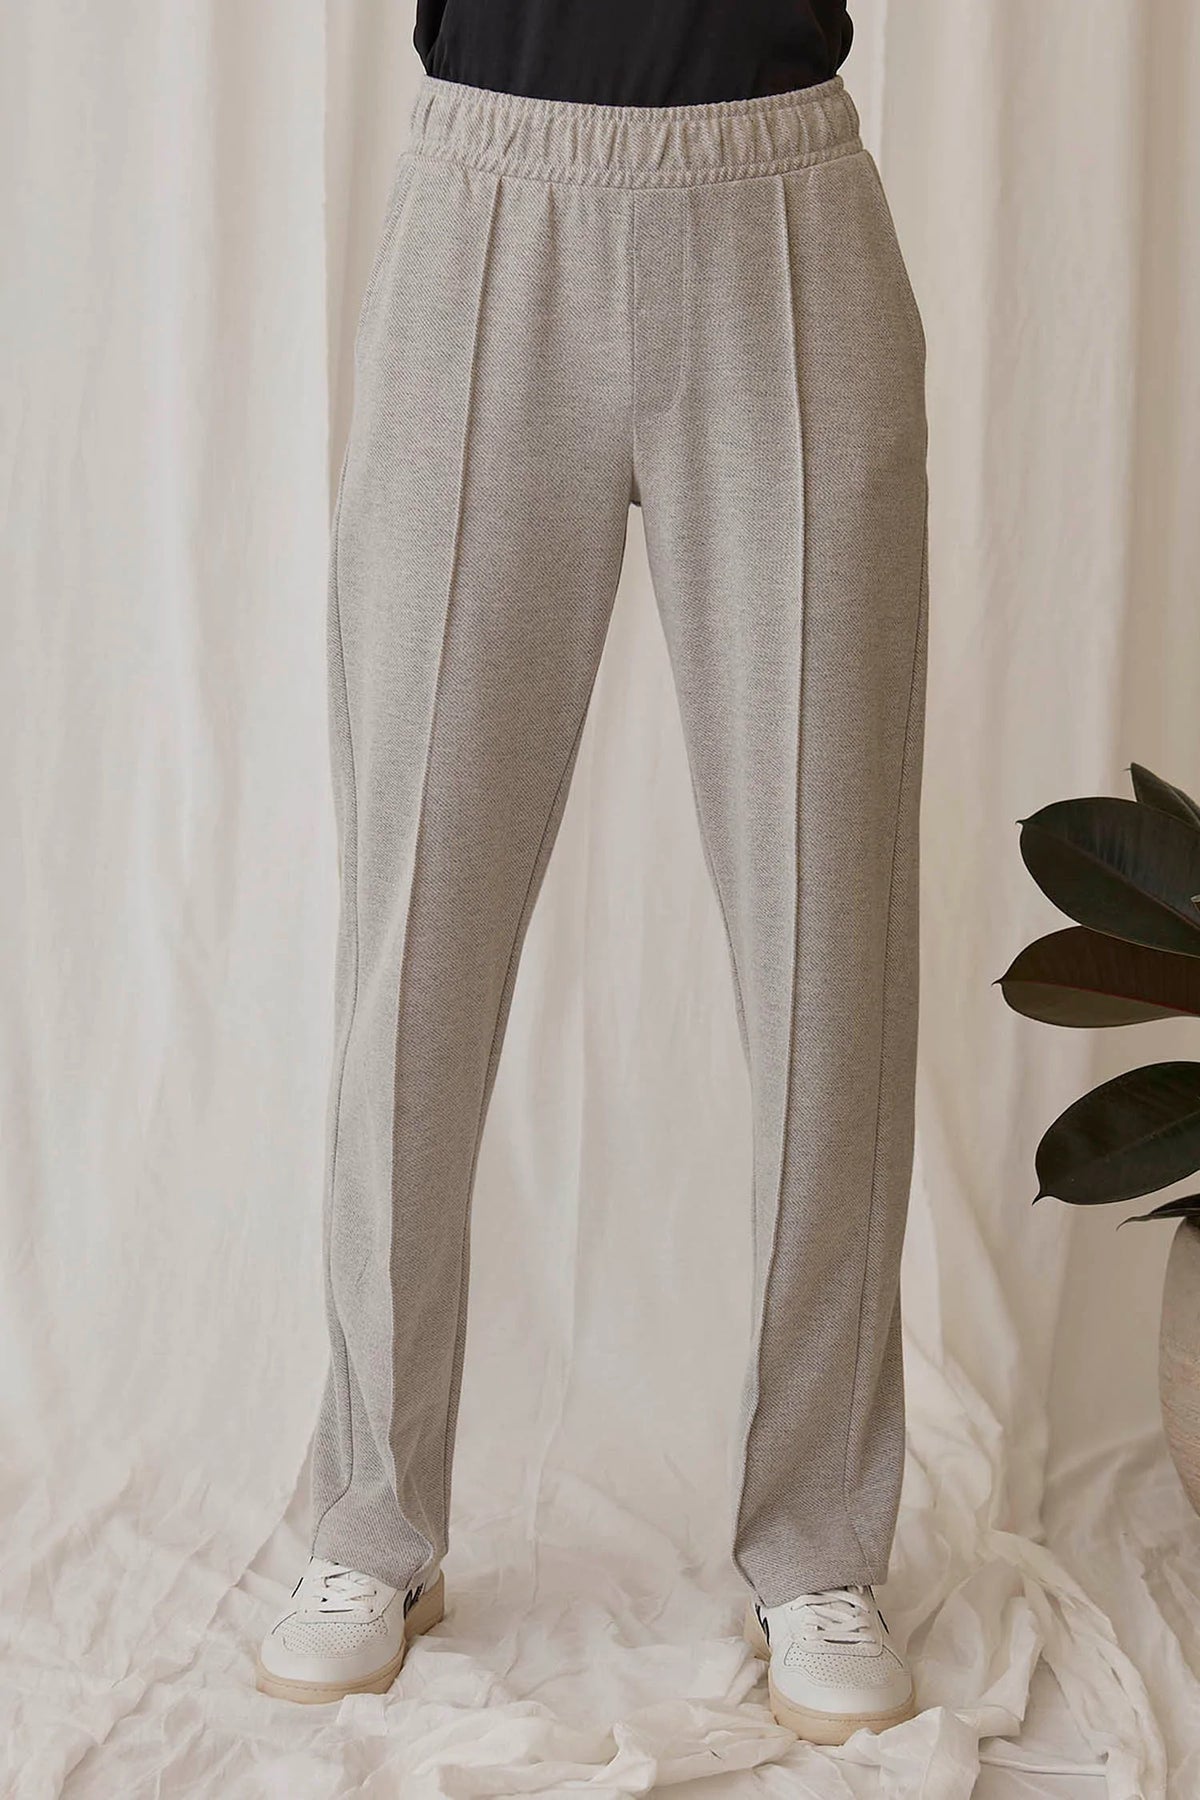 versatile grey pants for work and travel slow fashion